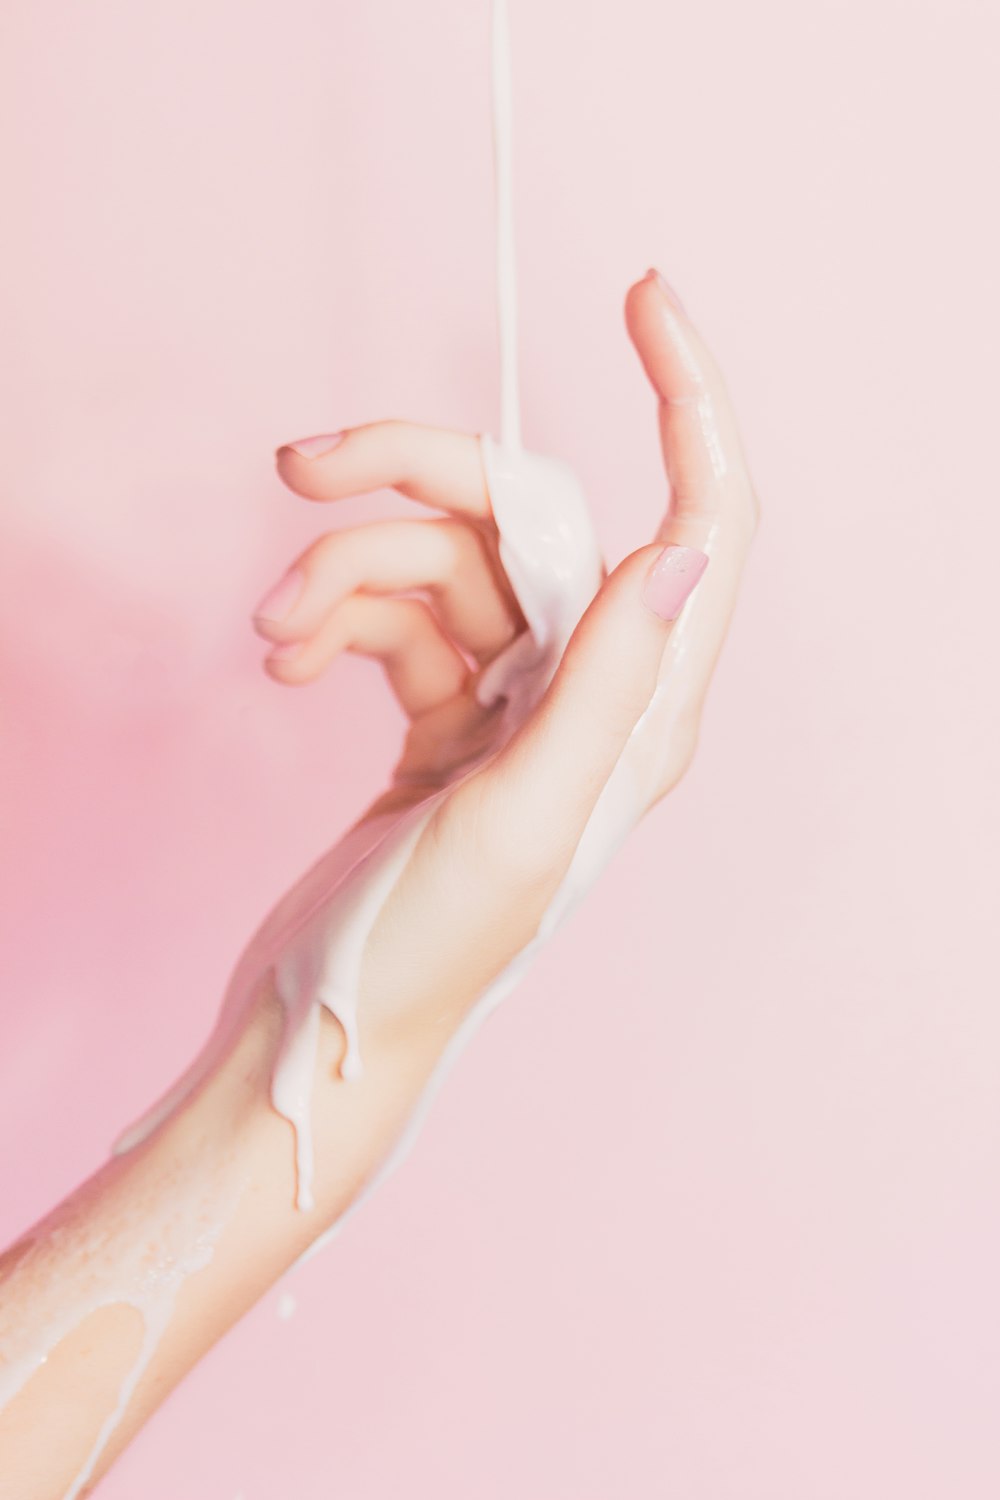 a woman's hand holding a bottle of lotion